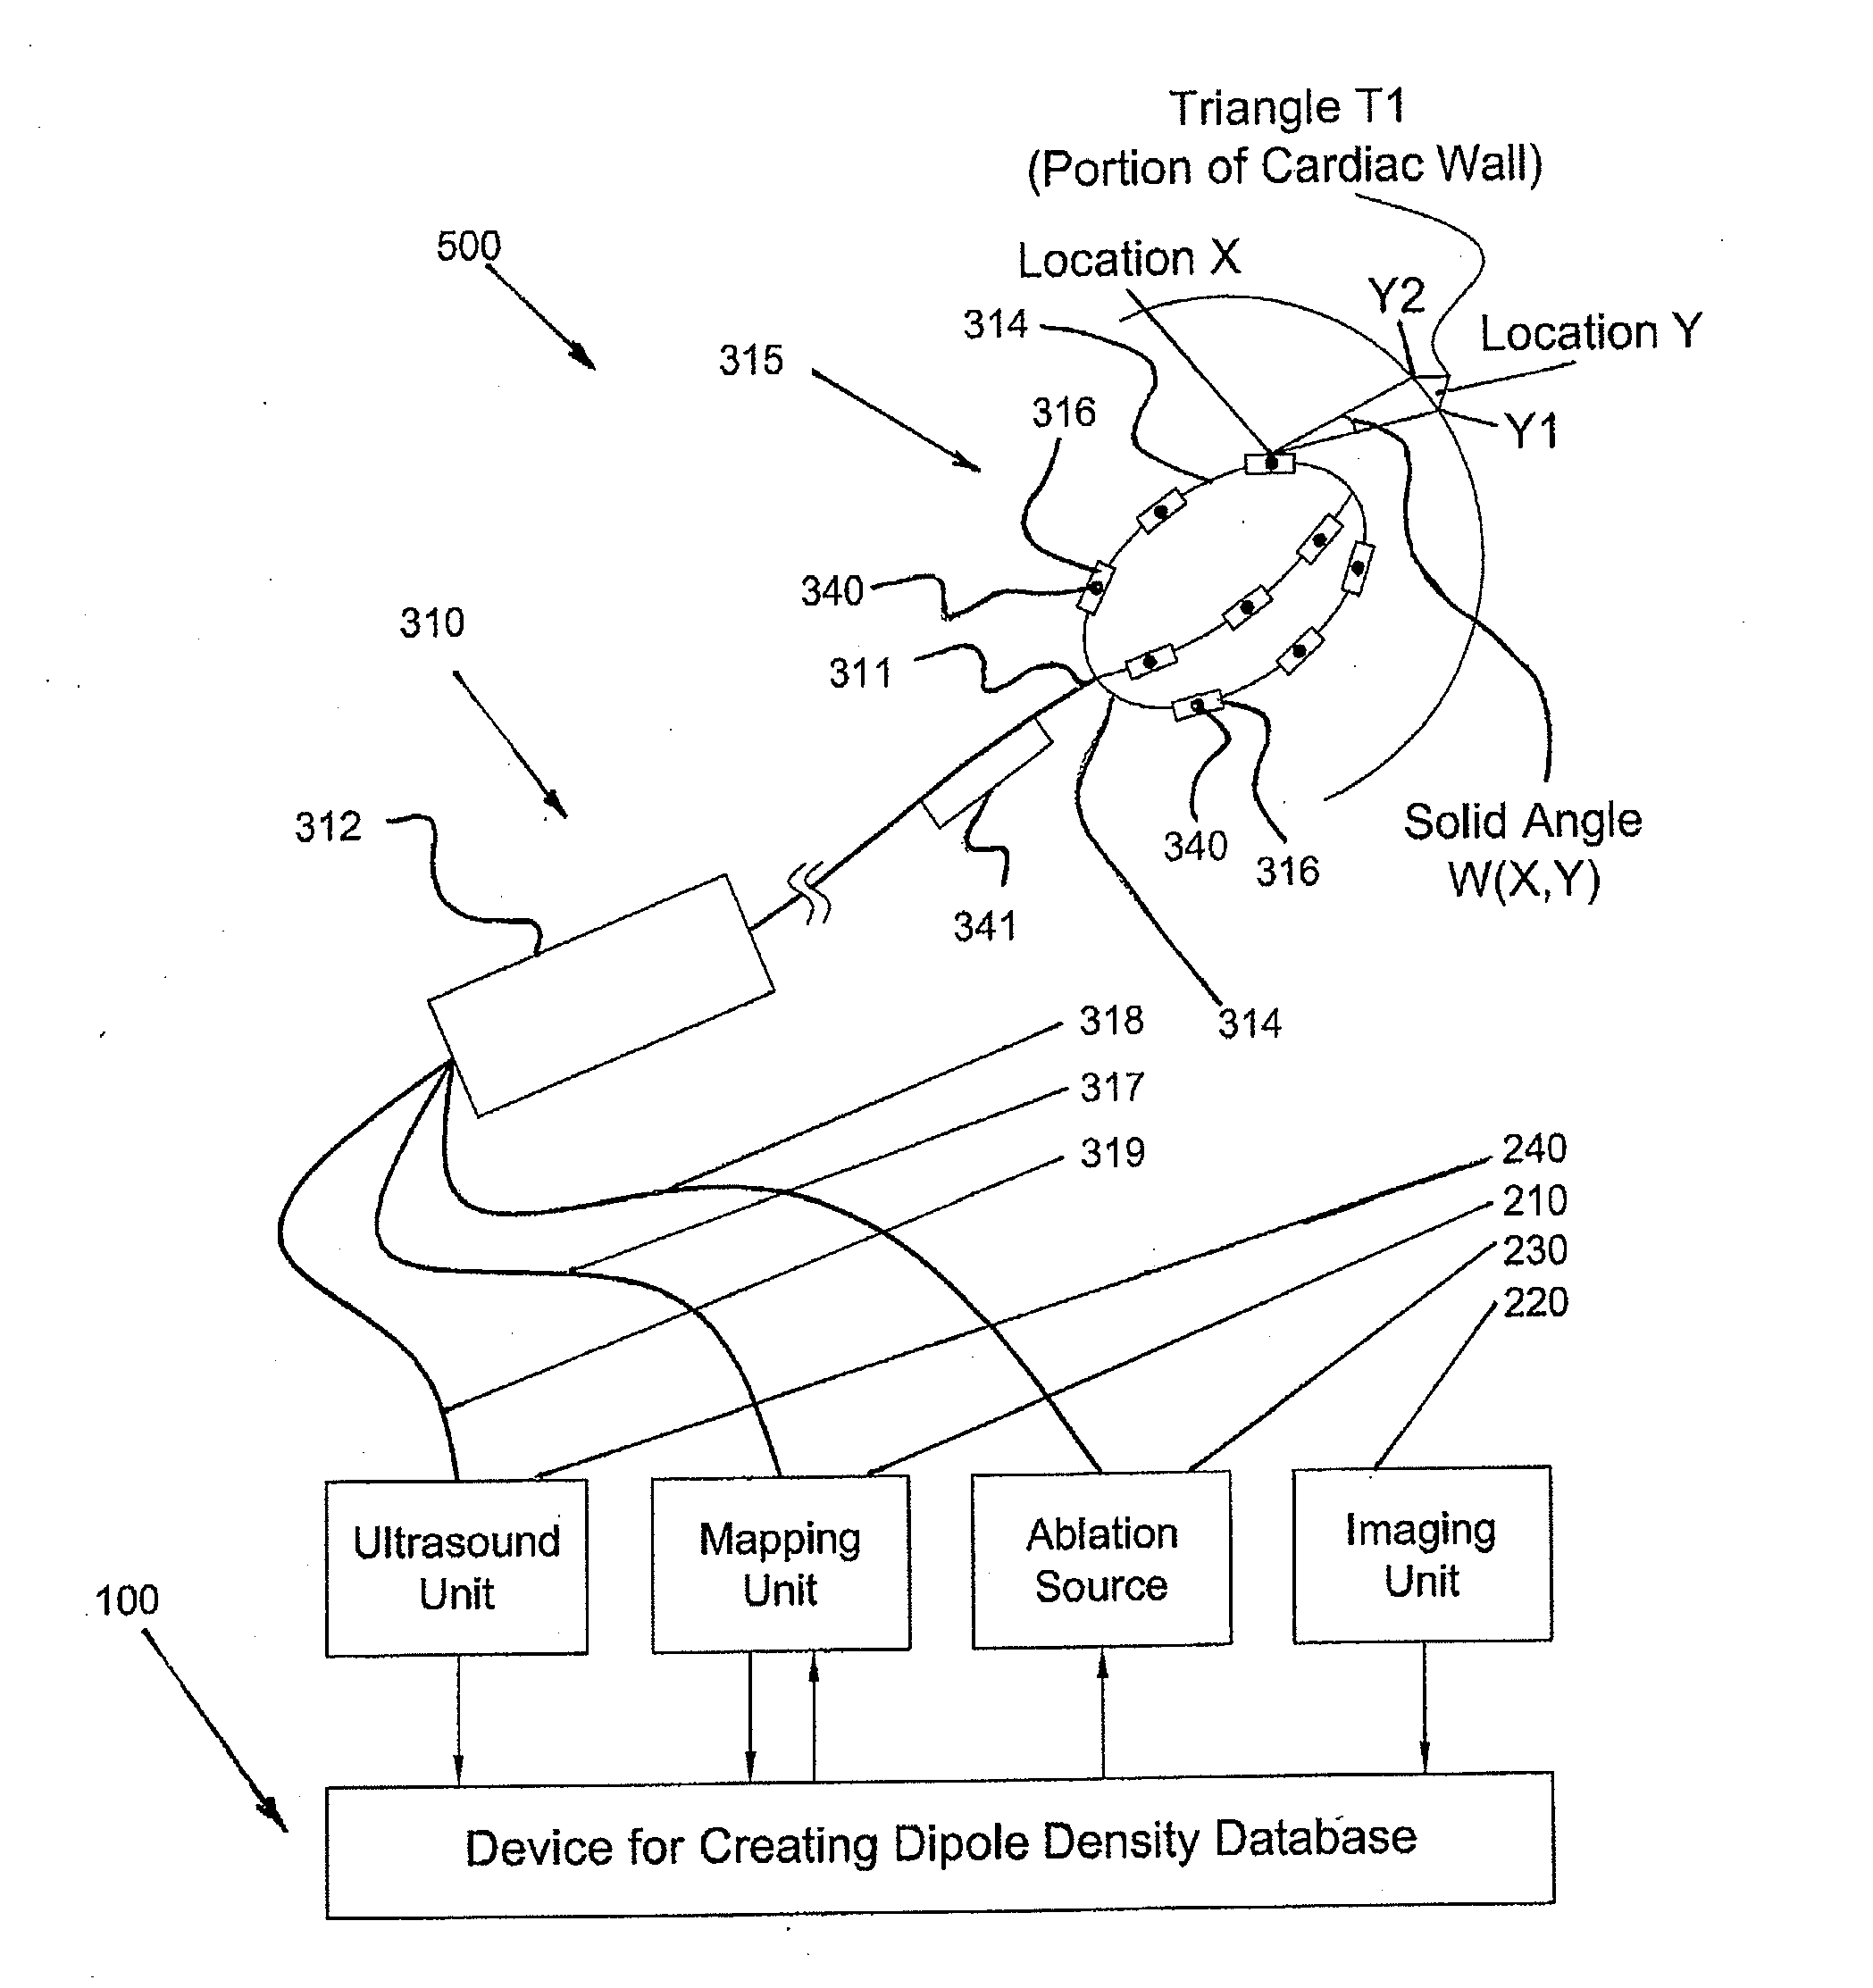 Device and method for the geometric determination of electrical dipole densities on the cardiac wall